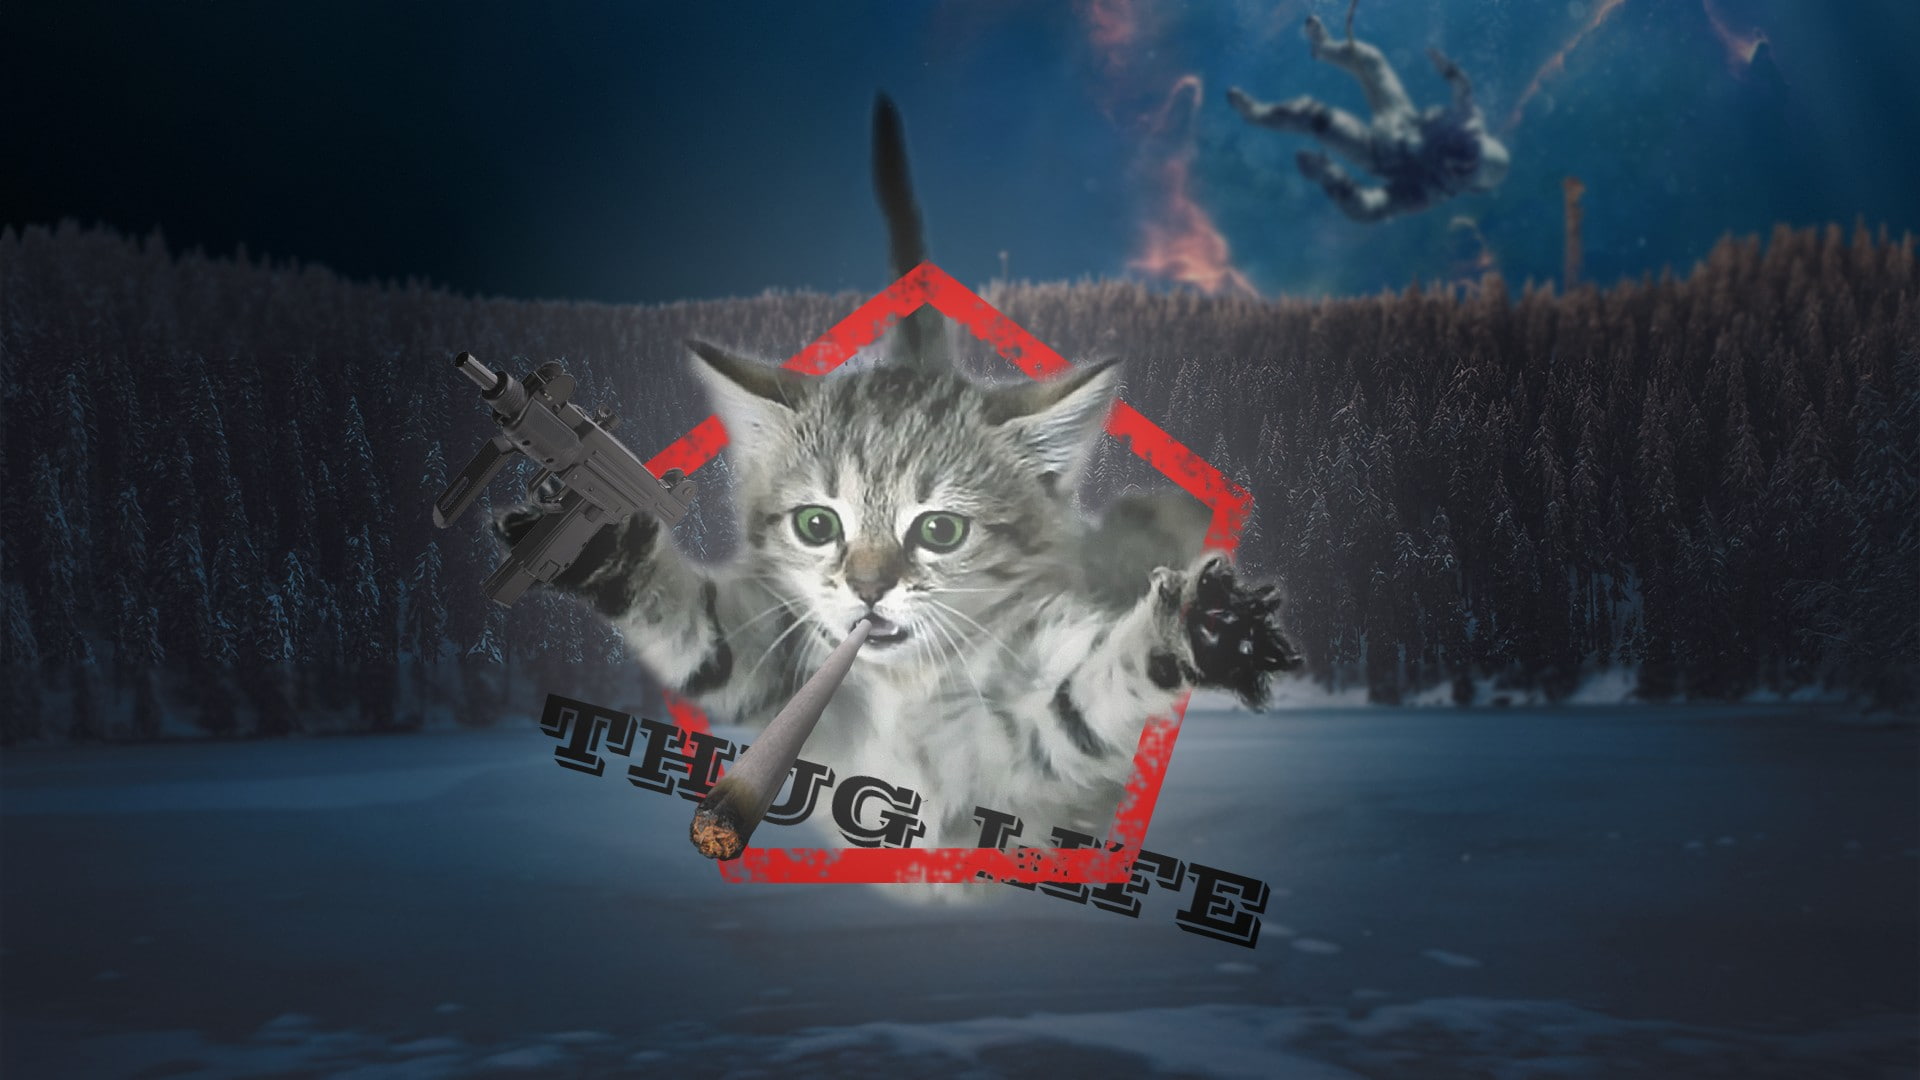 astronaut, cat, forest, gangster, lake, Ps, Thug life, animal